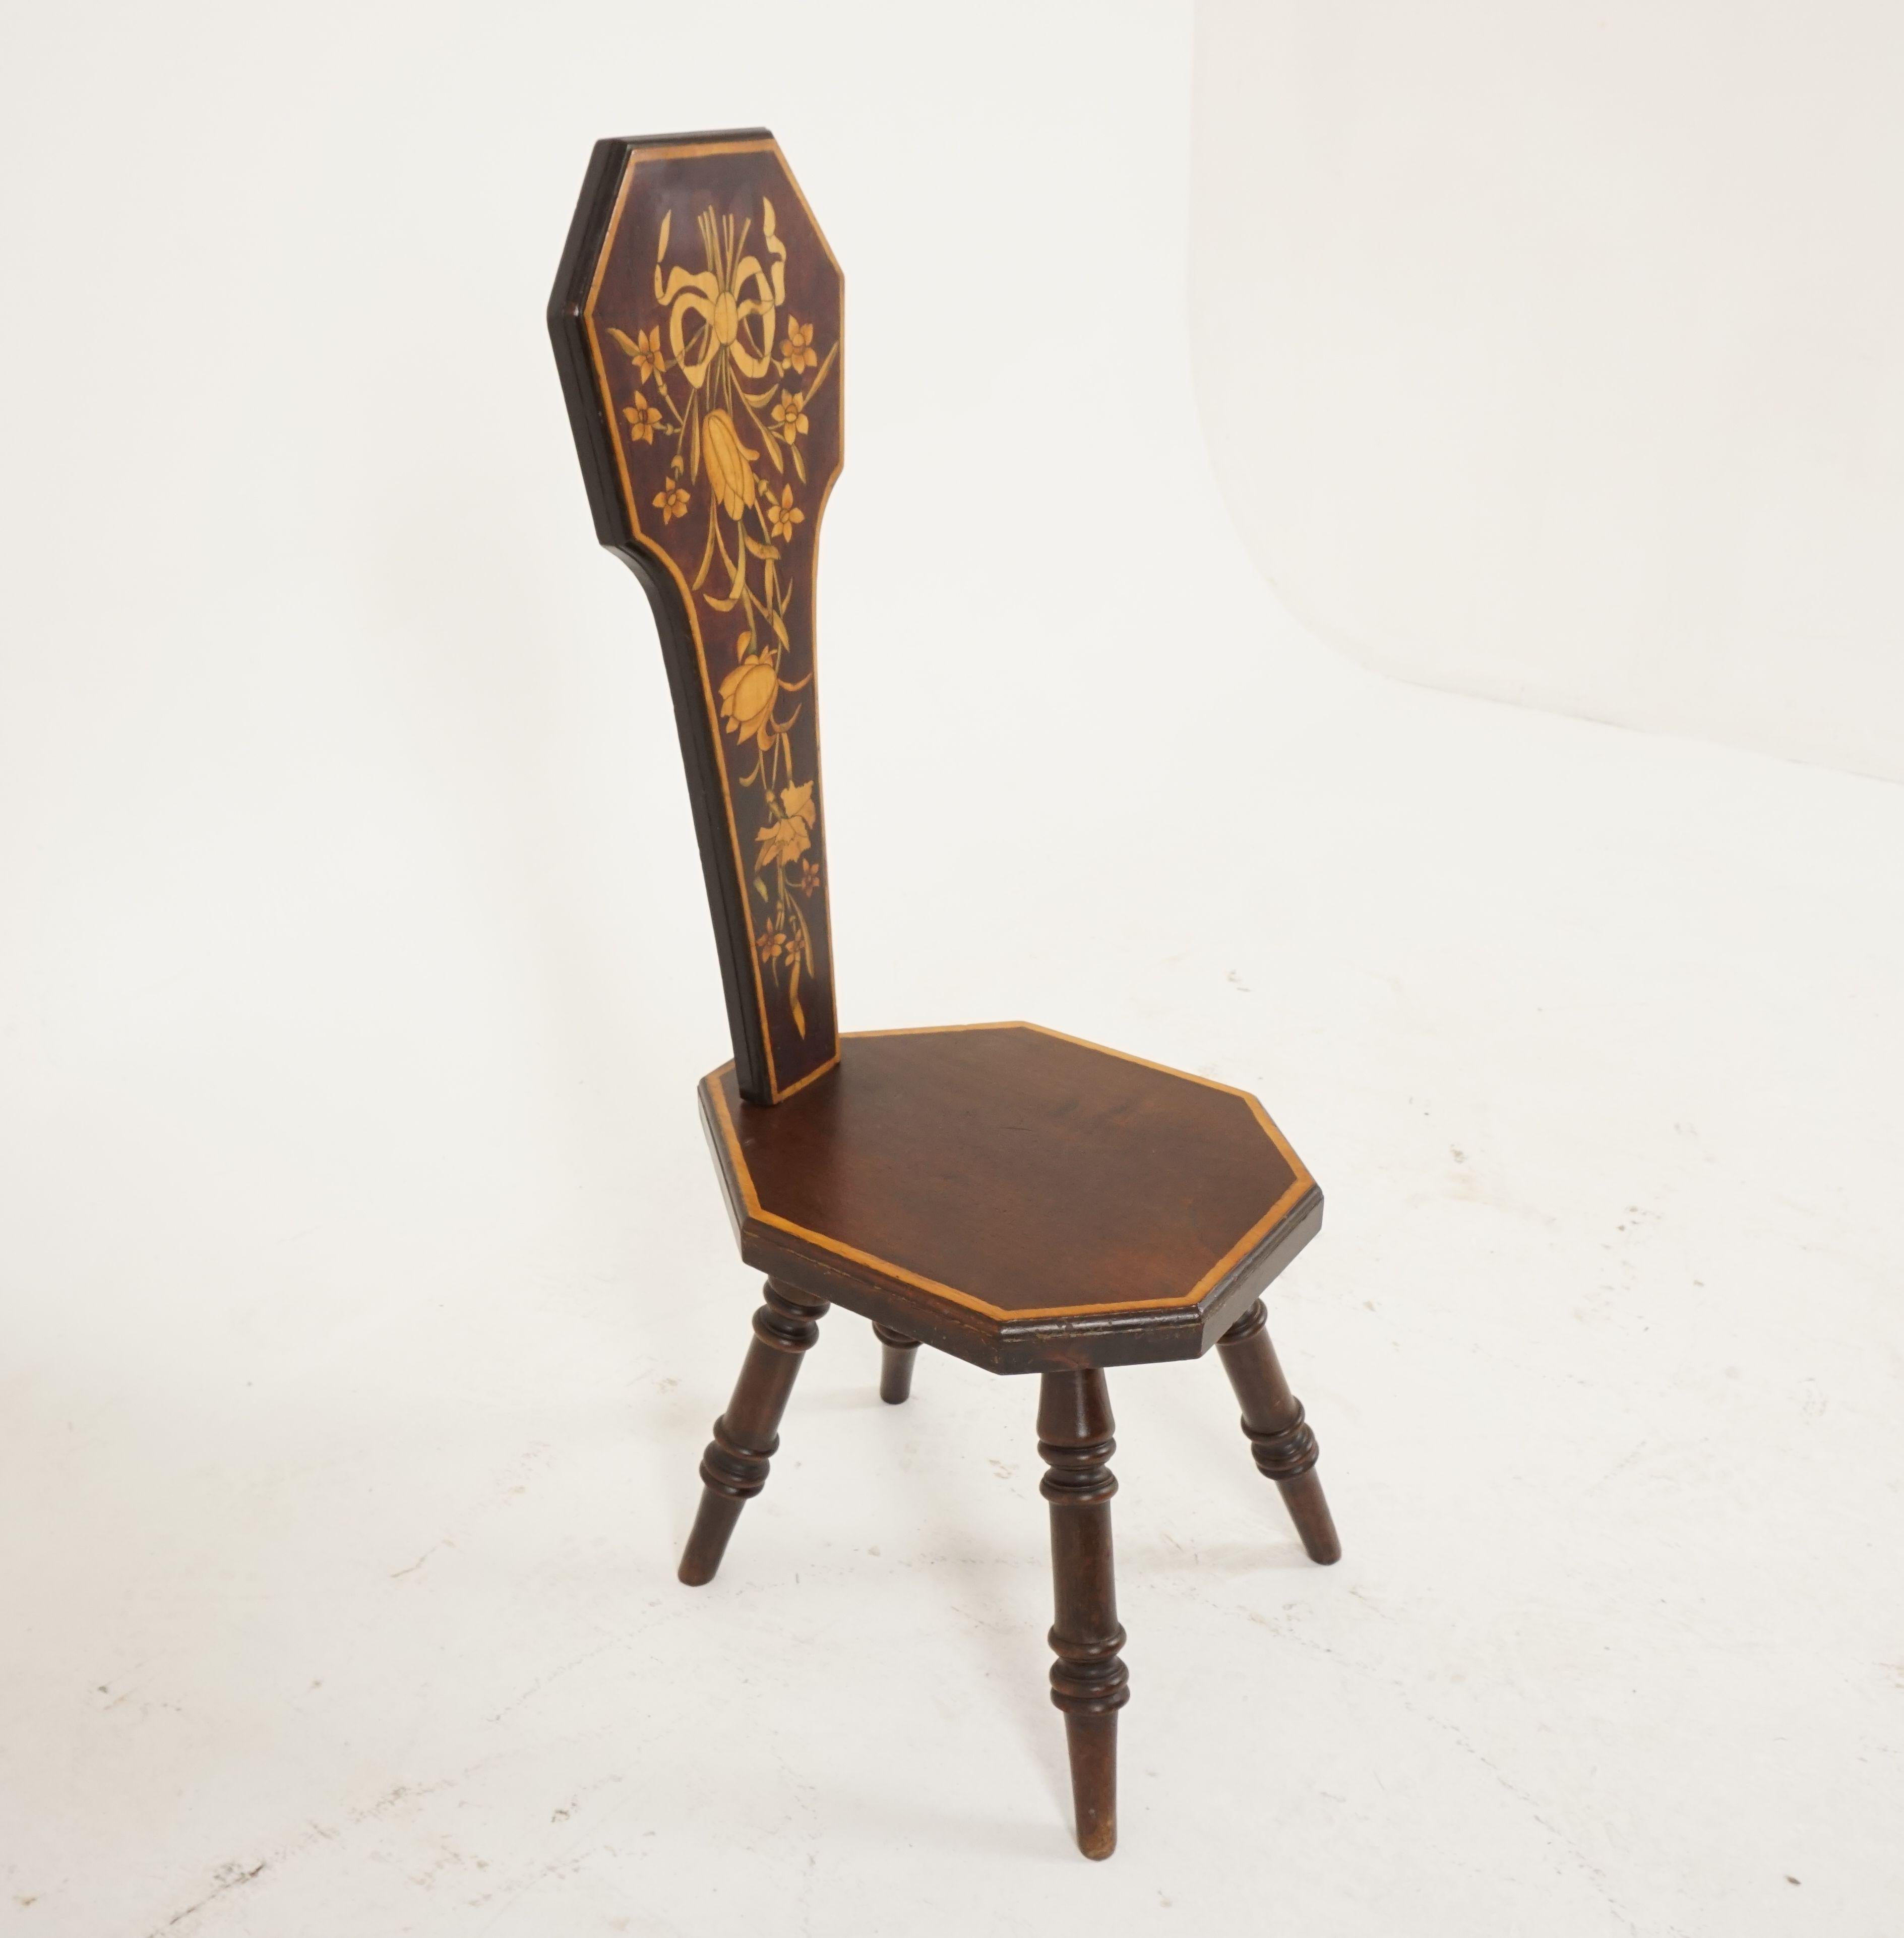 Antique Art Nouveau chair, poker work spinning chair, Scotland 1910, B2146

Scotland, 1910
Solid beechwood
Original finish
Unusual decorative floral poker work design to the back
Plain seat with border
Standing on four turned legs
All joints